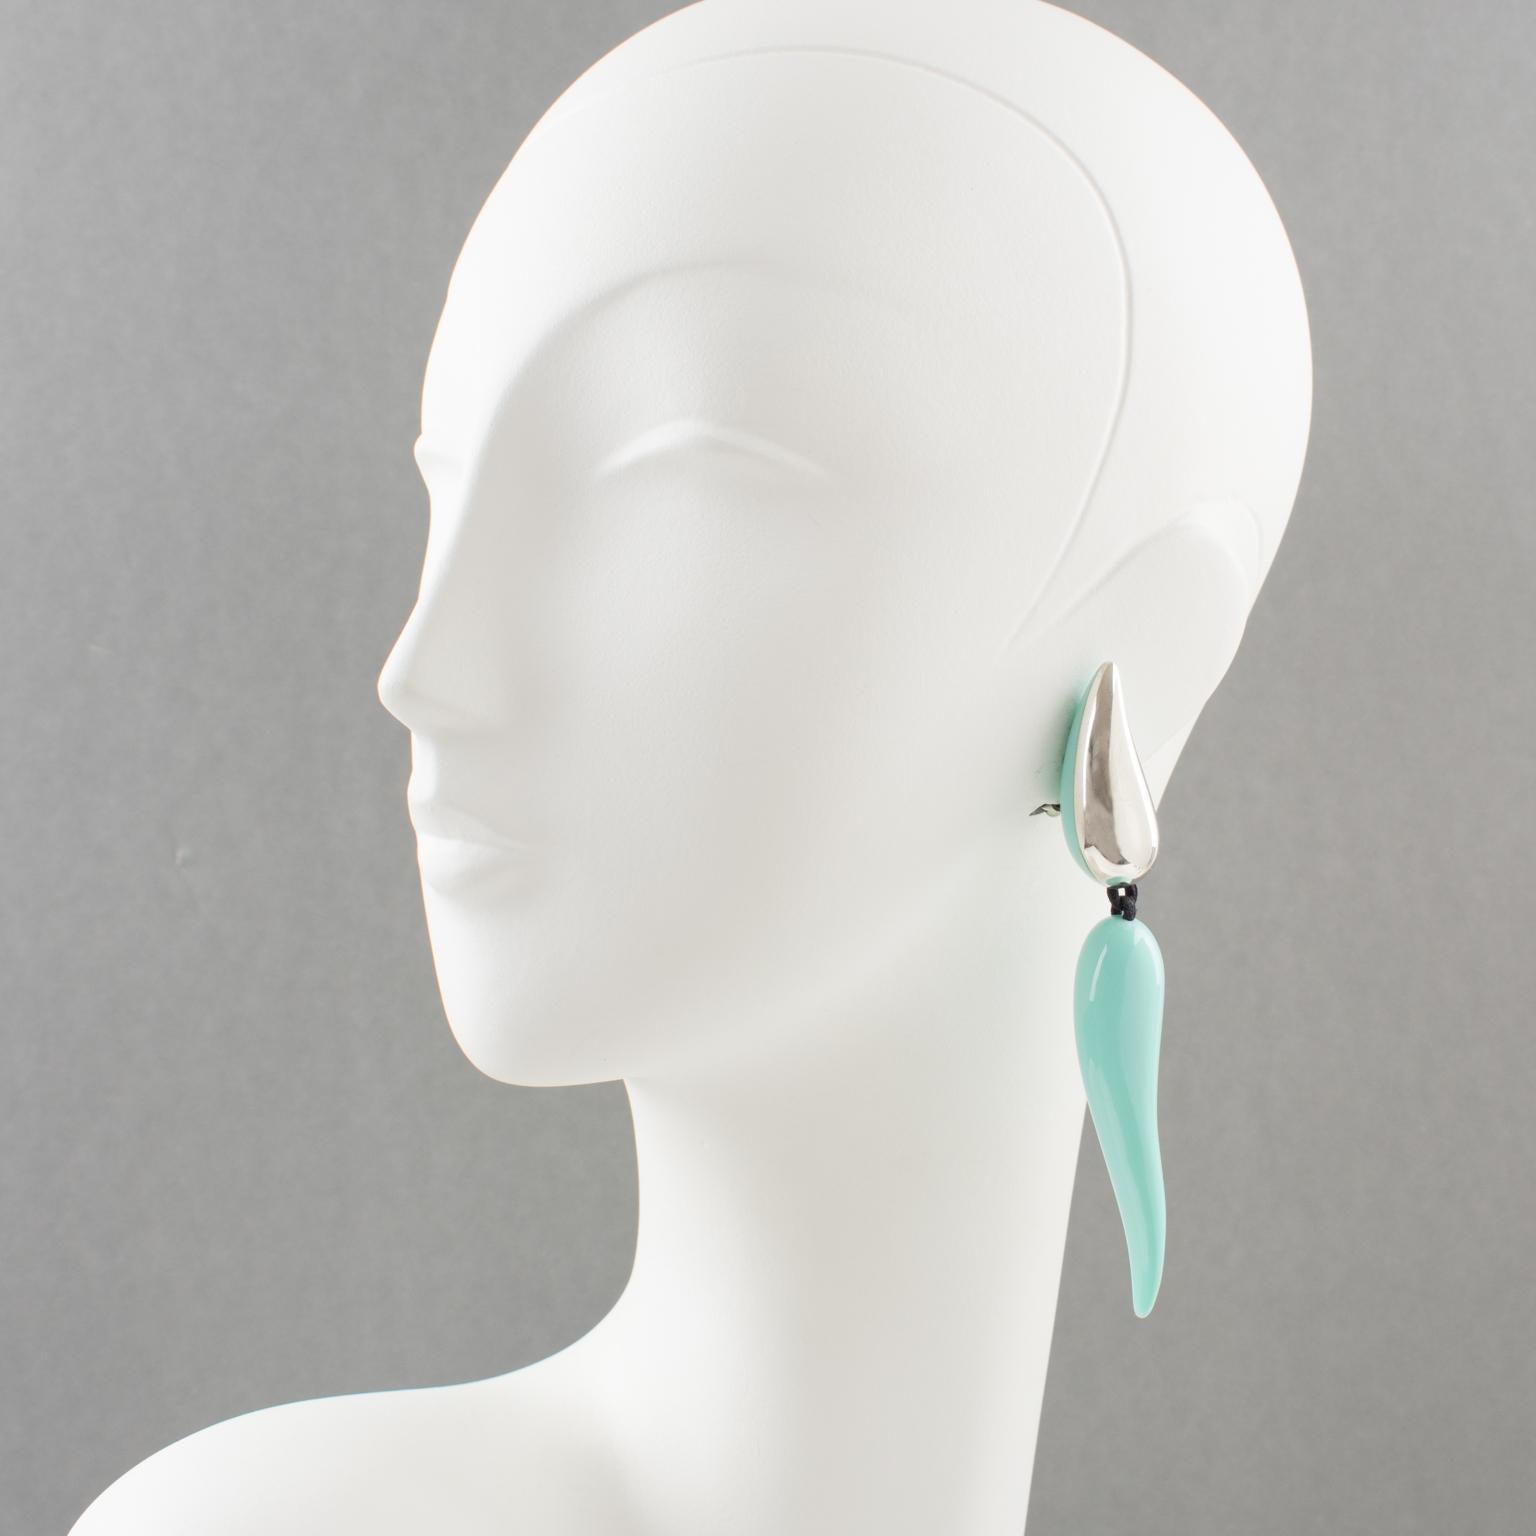 Thrilling oversized clip-on earrings by Gerda Lyngaard for Monies. Features an extra-long dangle shape in an organic-feel design in sterling silver contrasted with polar blue turquoise high gloss resin. Marked 